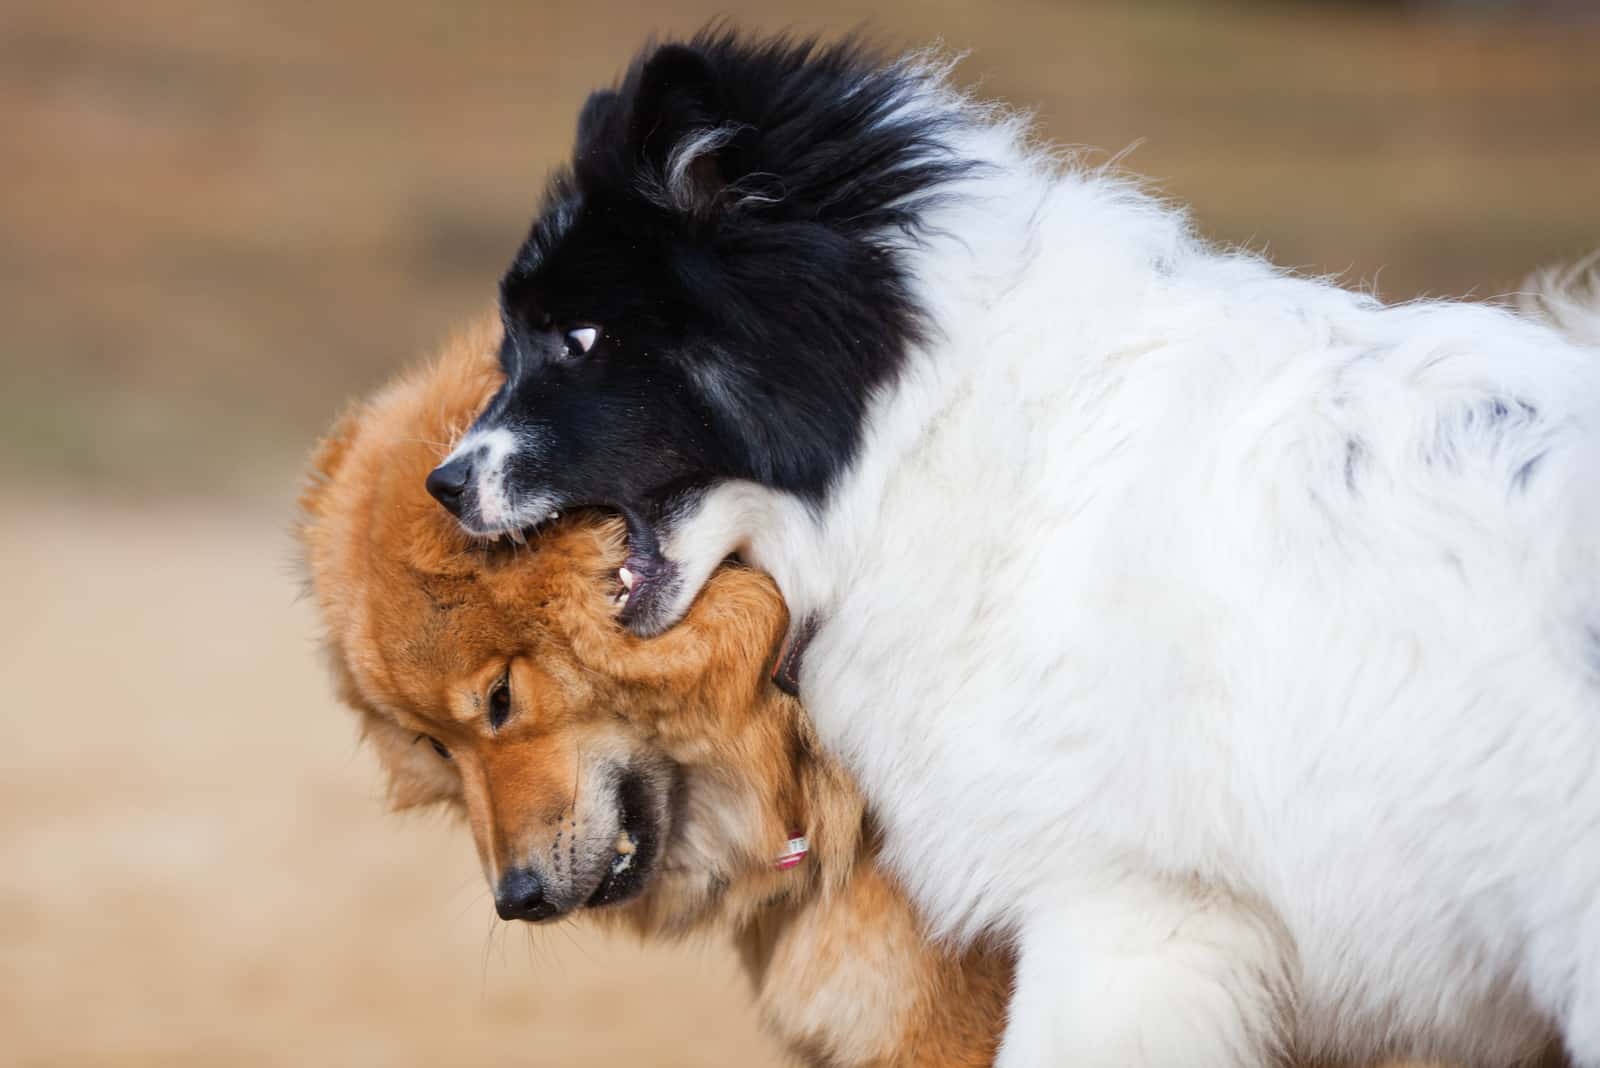 two dogs biting each other